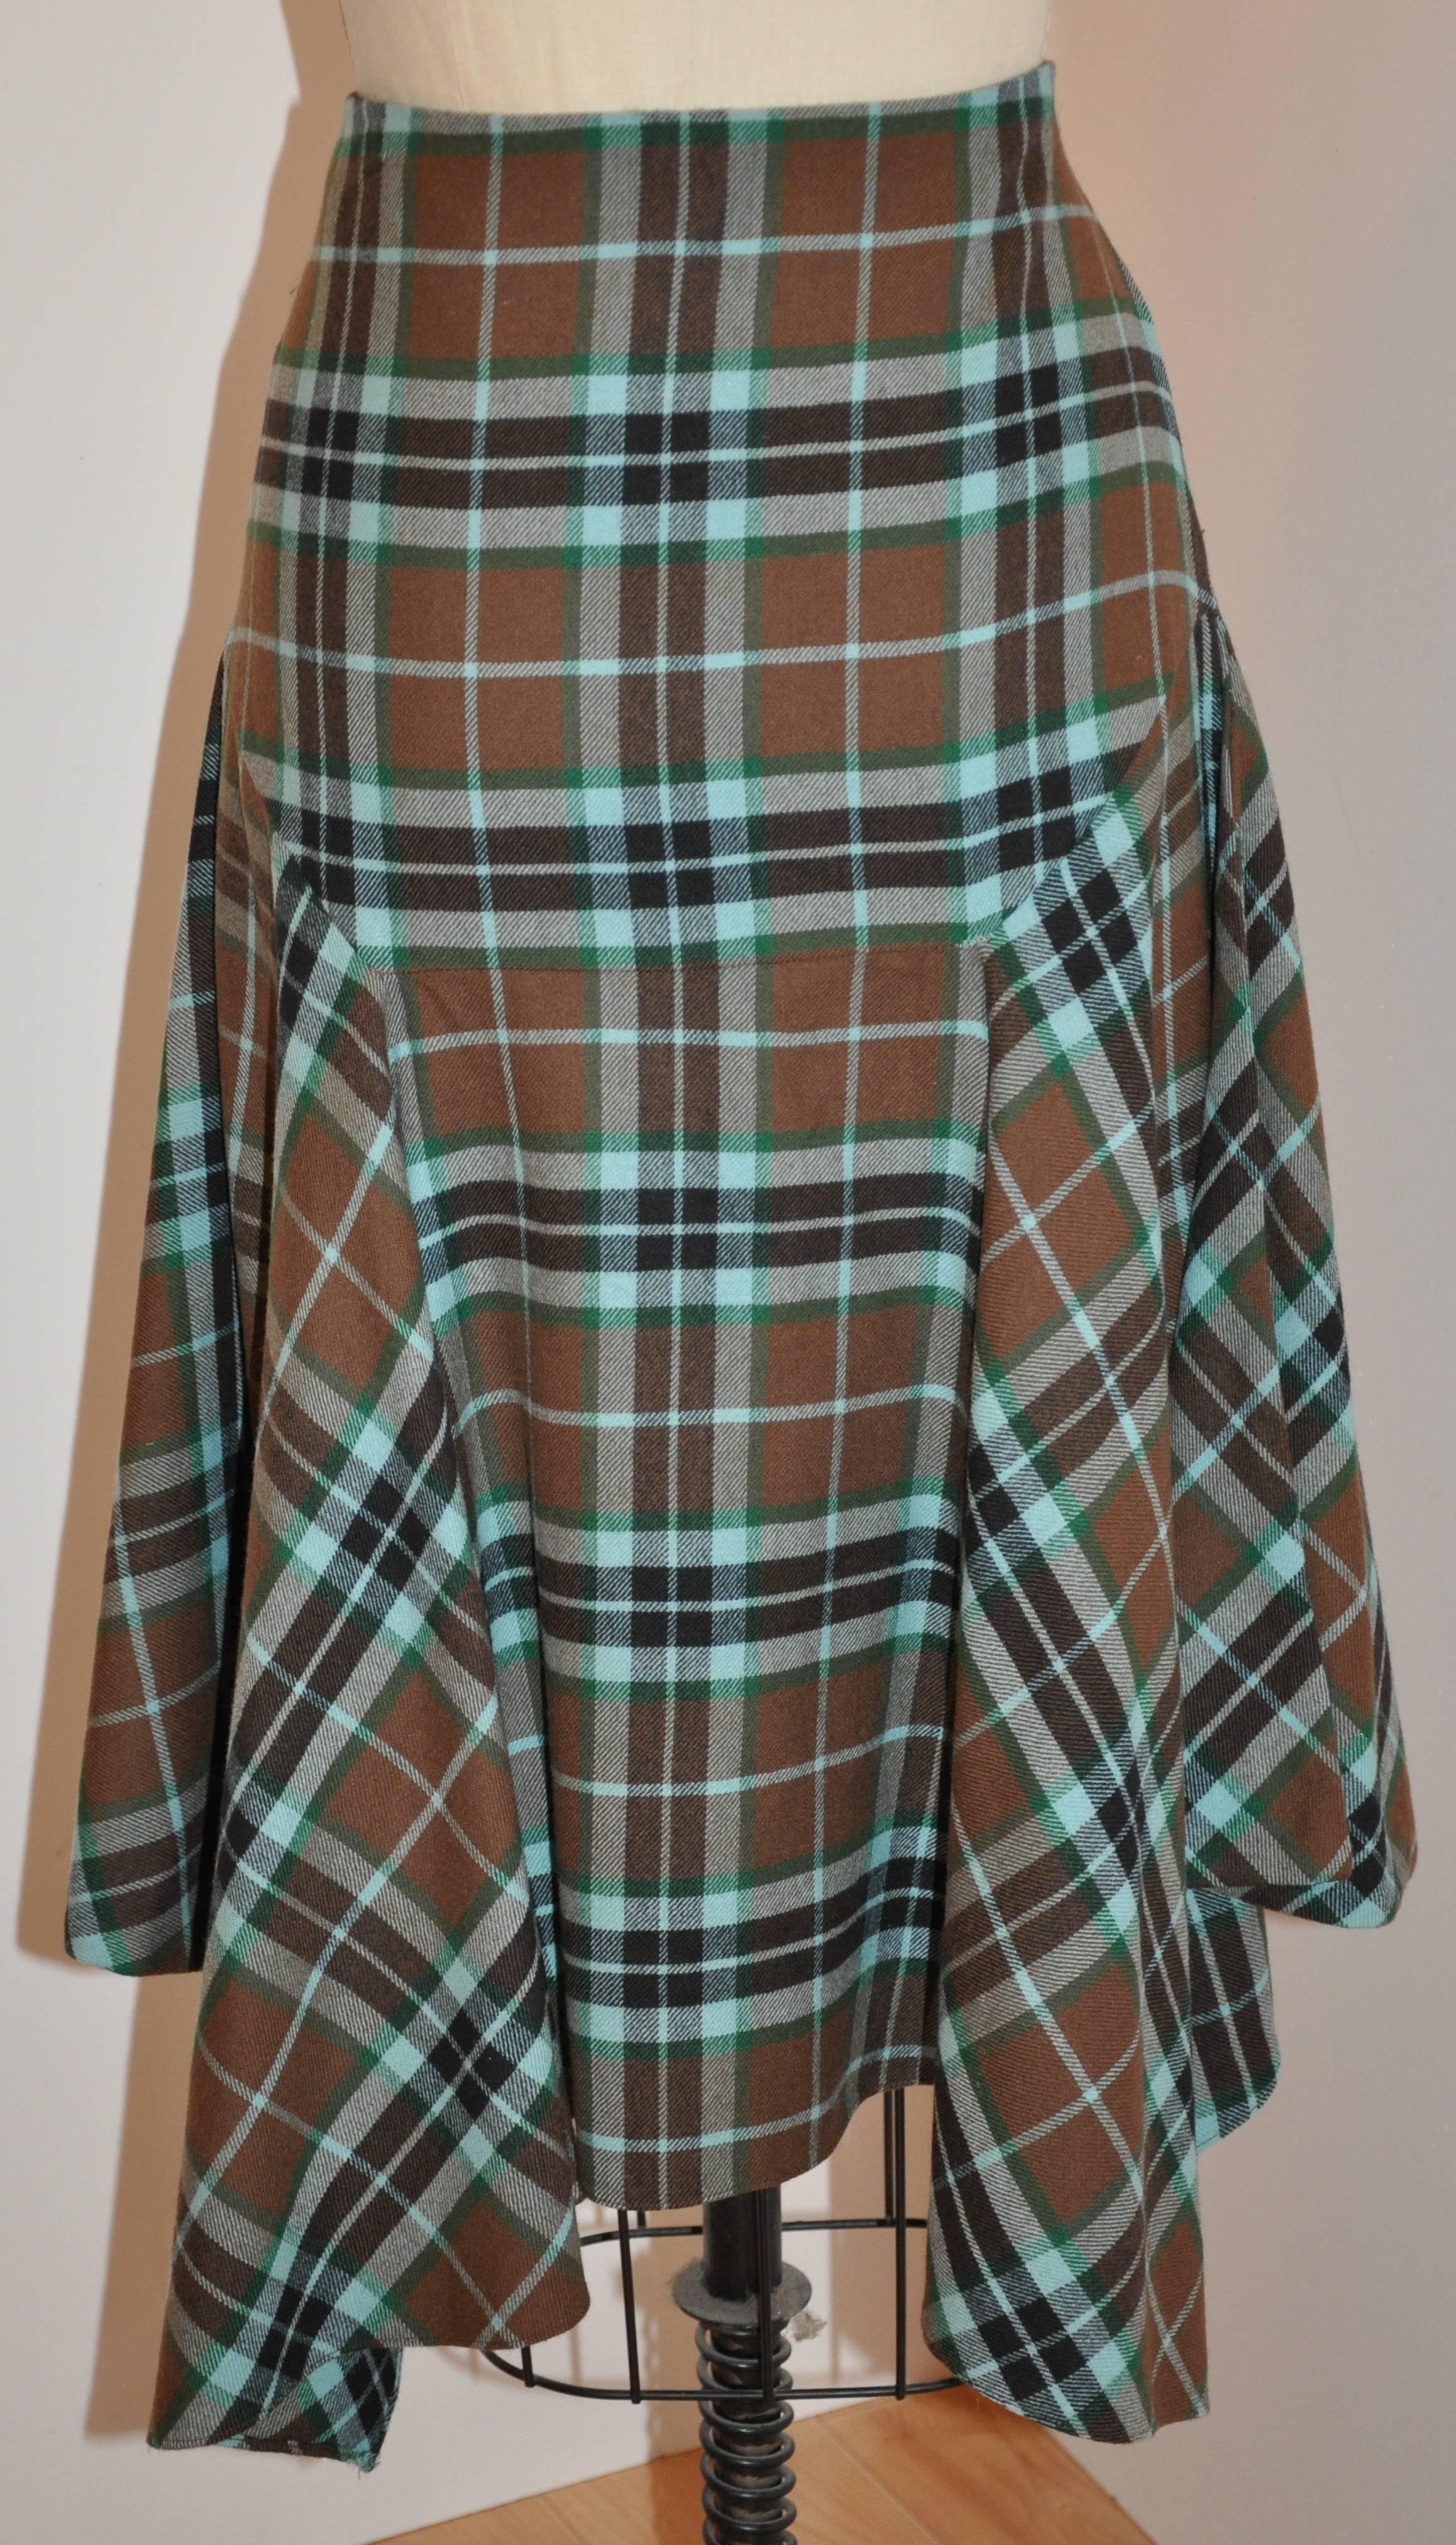        Givenchy wonderfully detailed multi-colored plaid deconstructed skirt has a side invisible zipper which measures 7